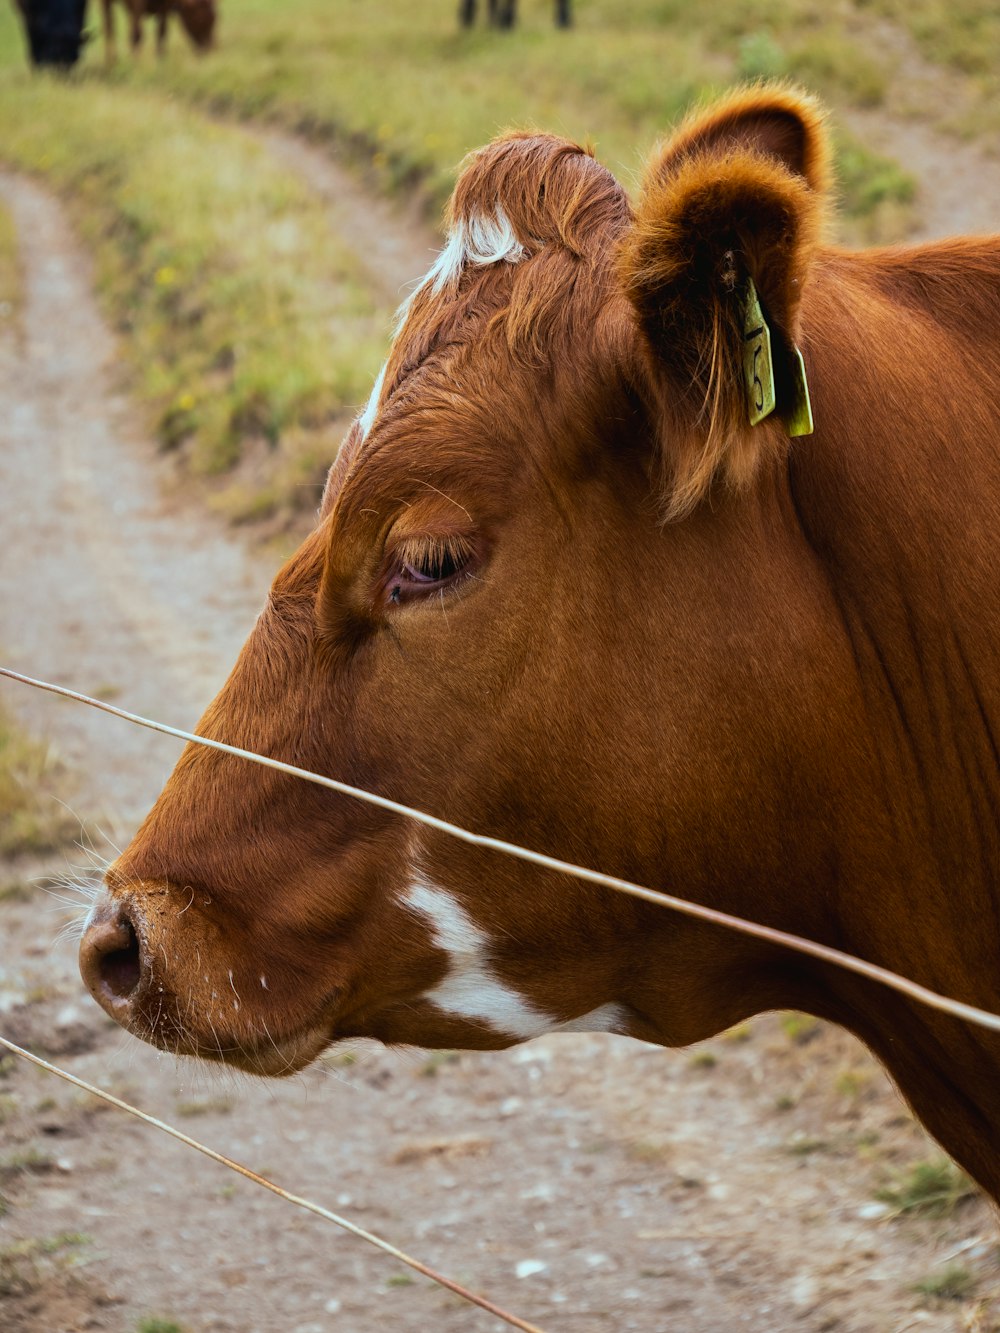 a brown and white cow standing on a dirt road